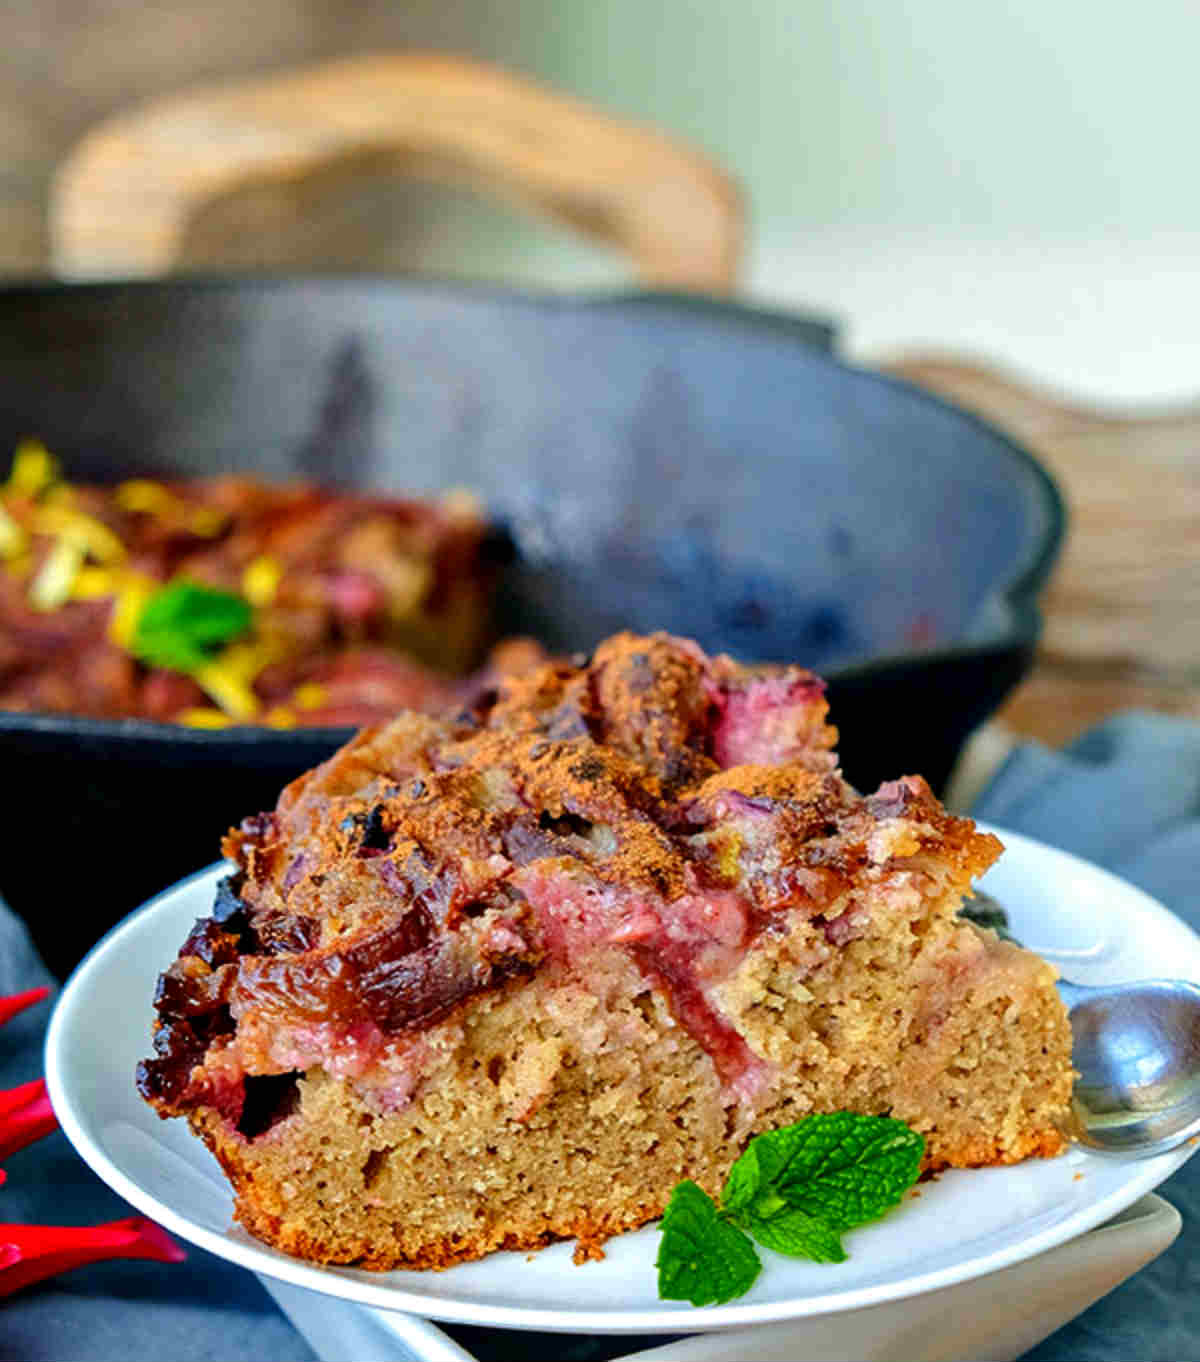 slice of gluten free plum skillet country cake on a plate